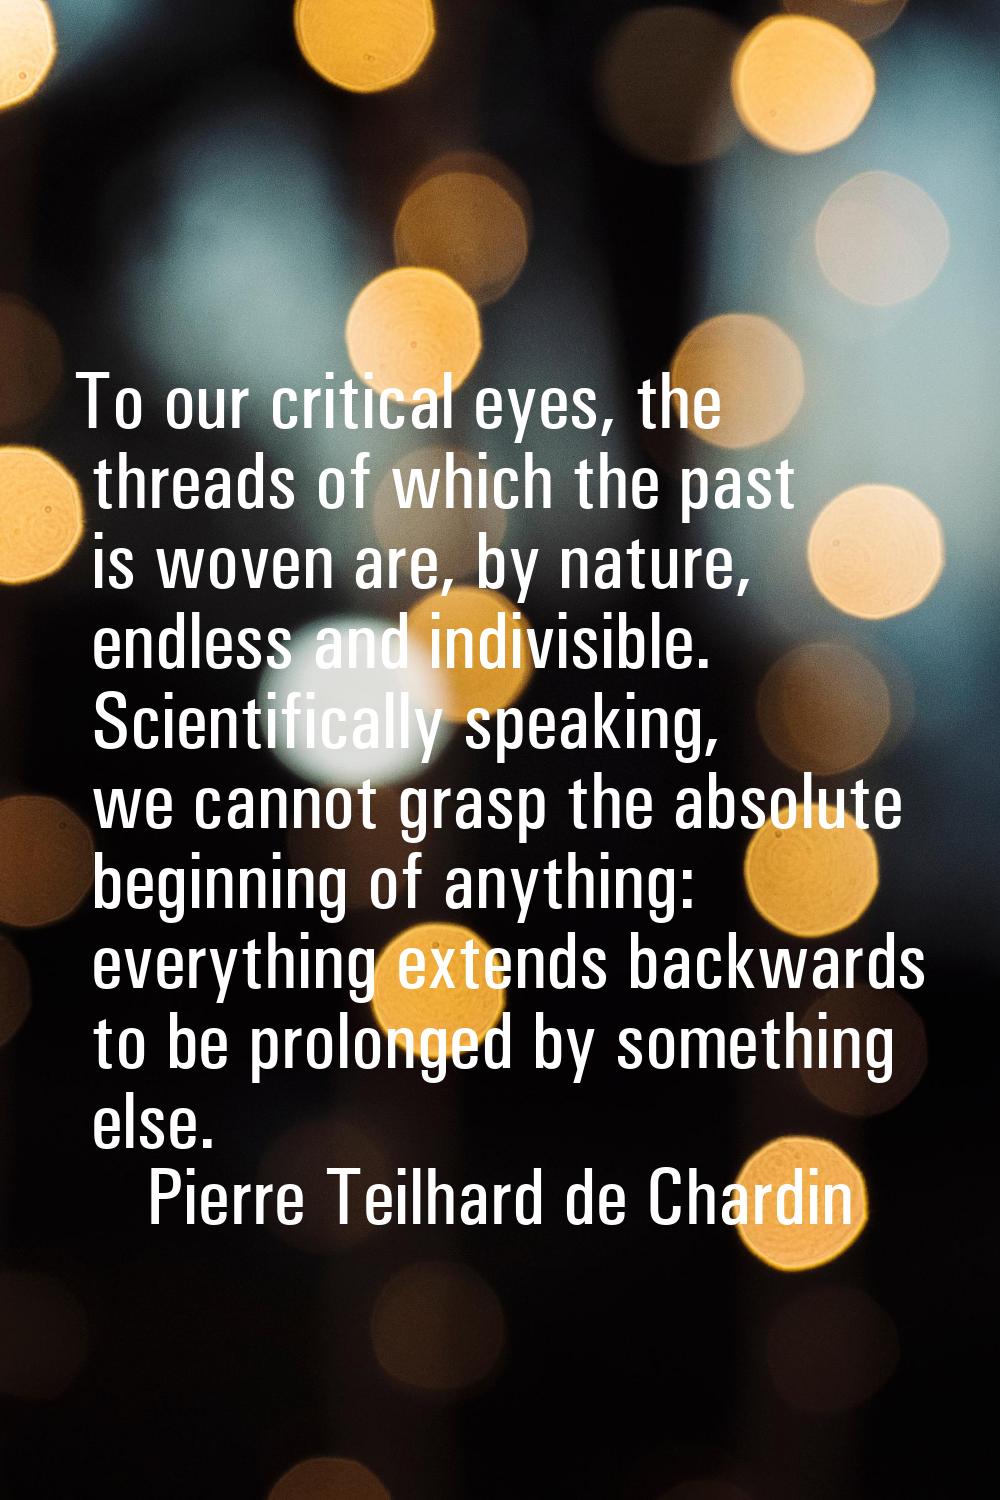 To our critical eyes, the threads of which the past is woven are, by nature, endless and indivisibl